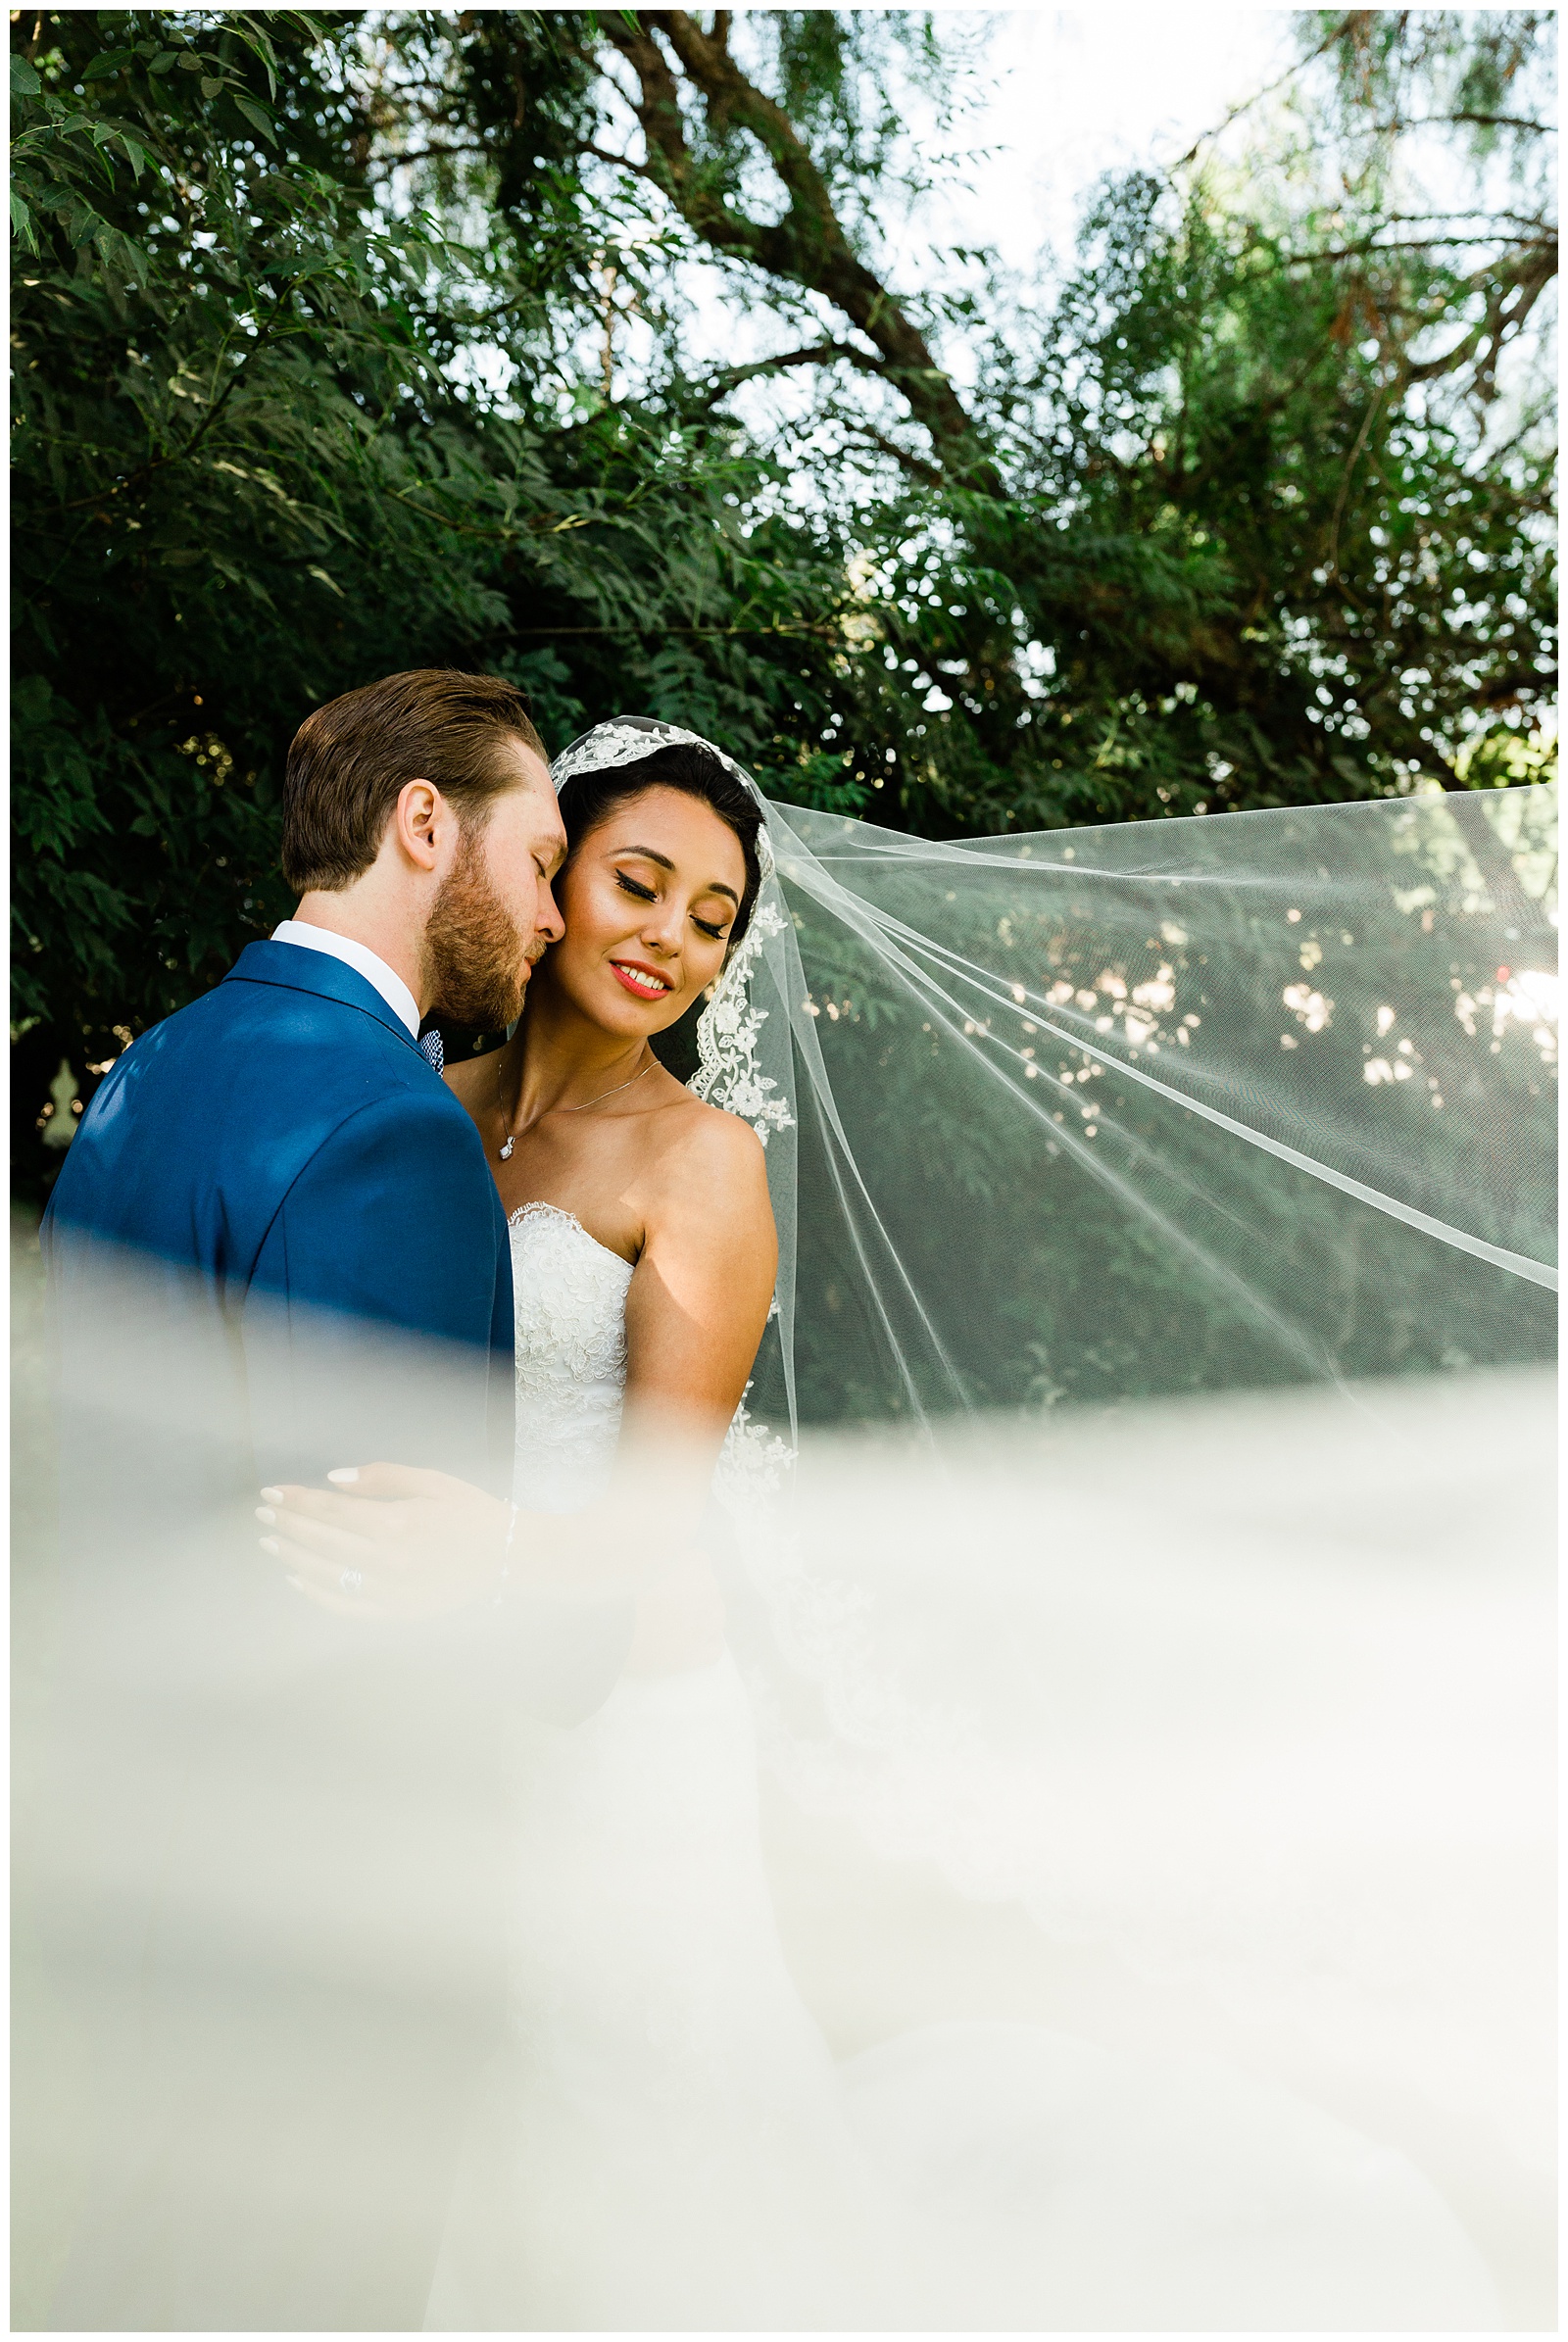 veil shot with a cathedral wedding veil